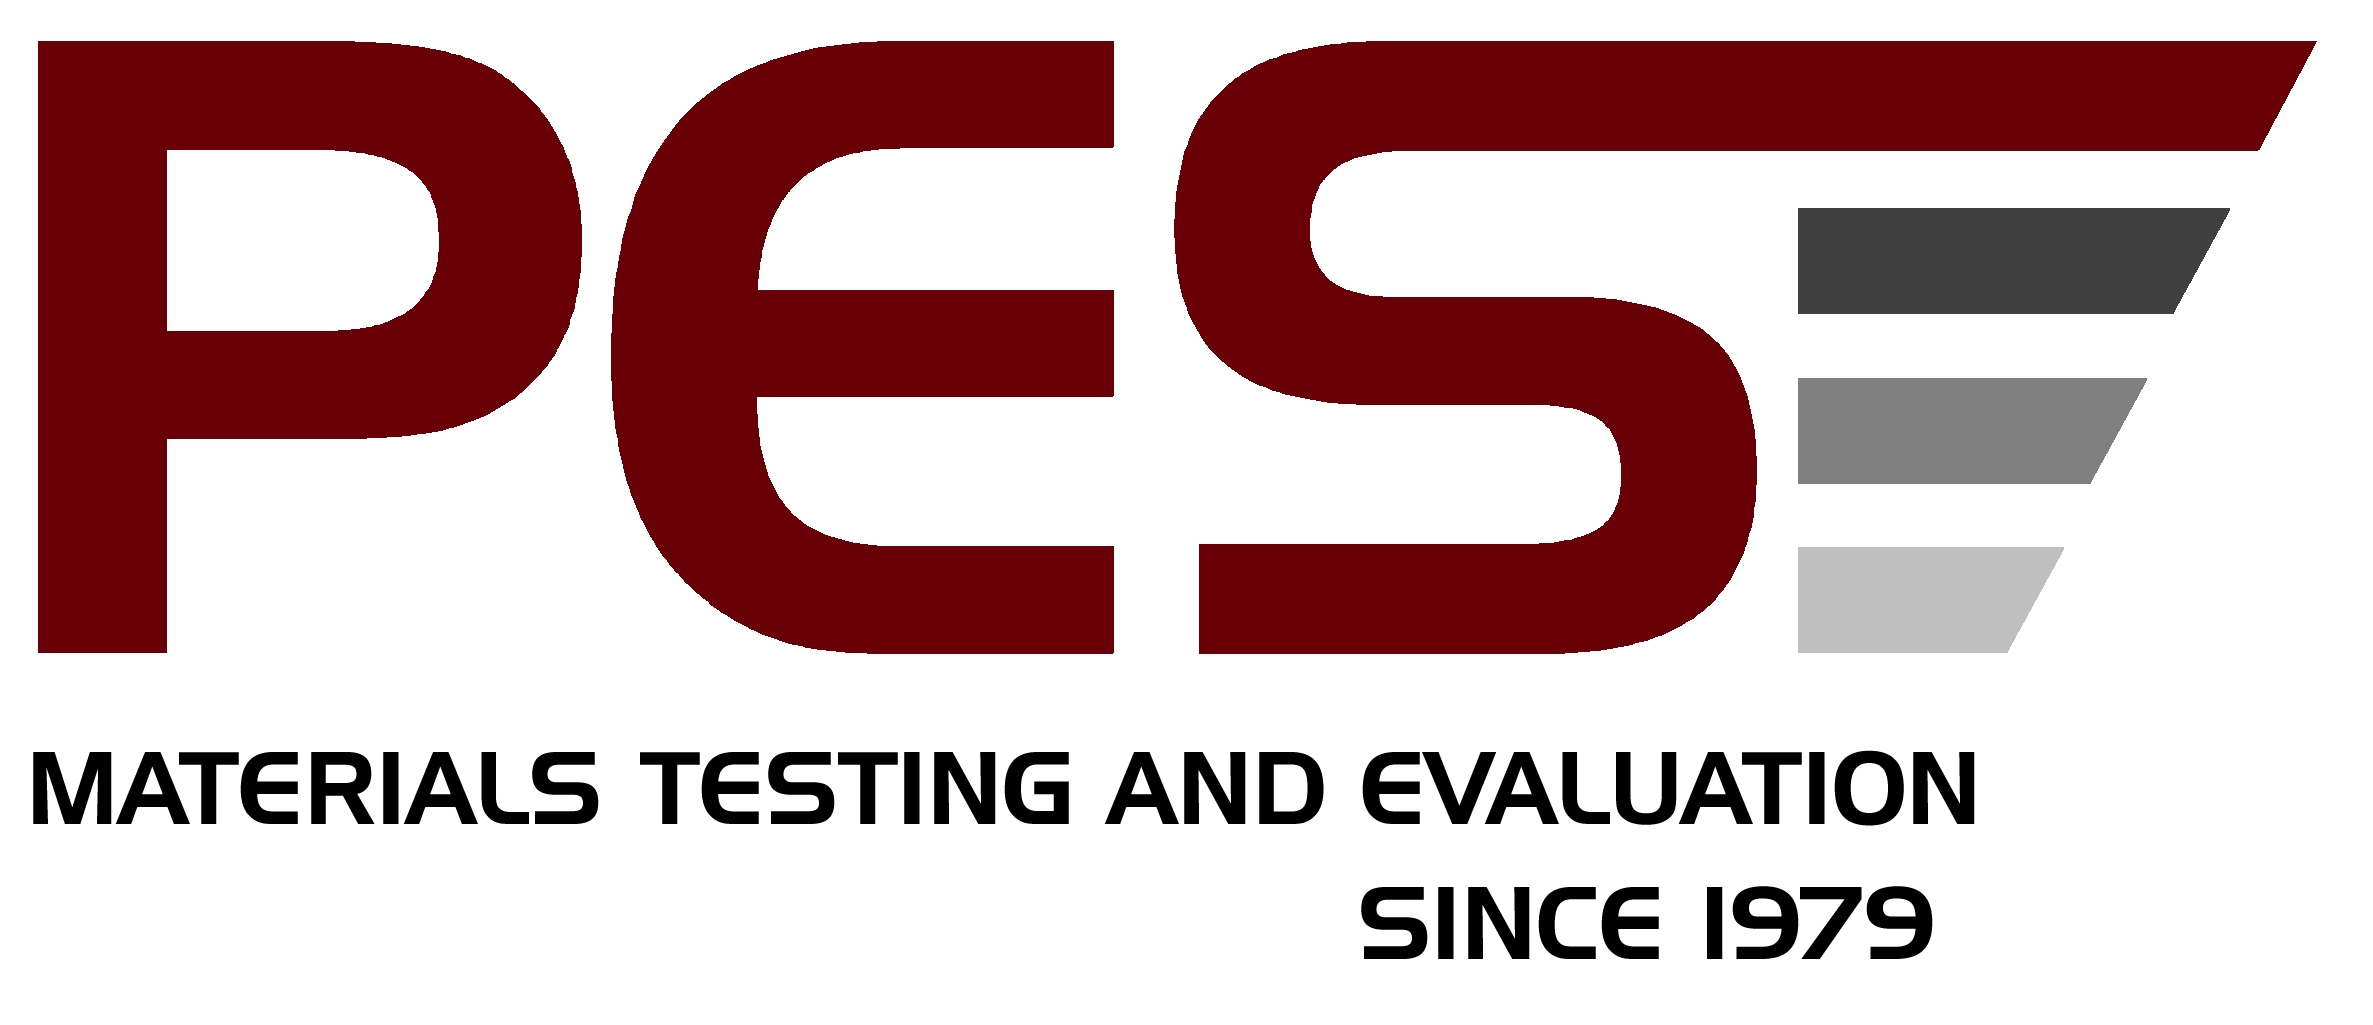 Product Evaluation Systems, Inc.